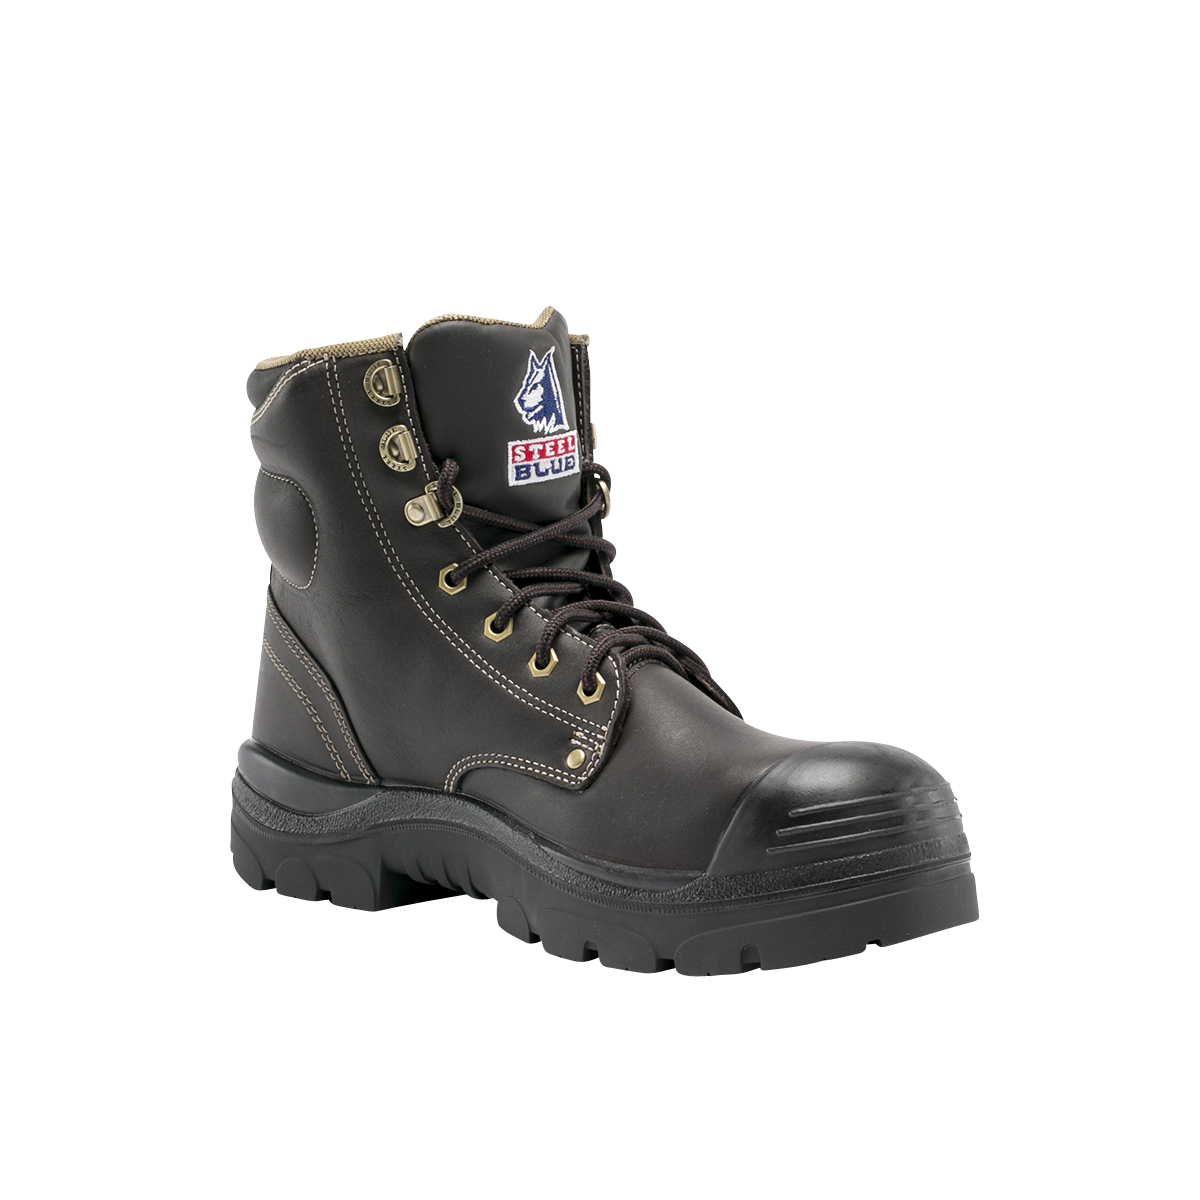 SAFETY BOOT ARGYLE BUMPCAP 10 -ANKLE LACE UP WHISKEY NITRILE